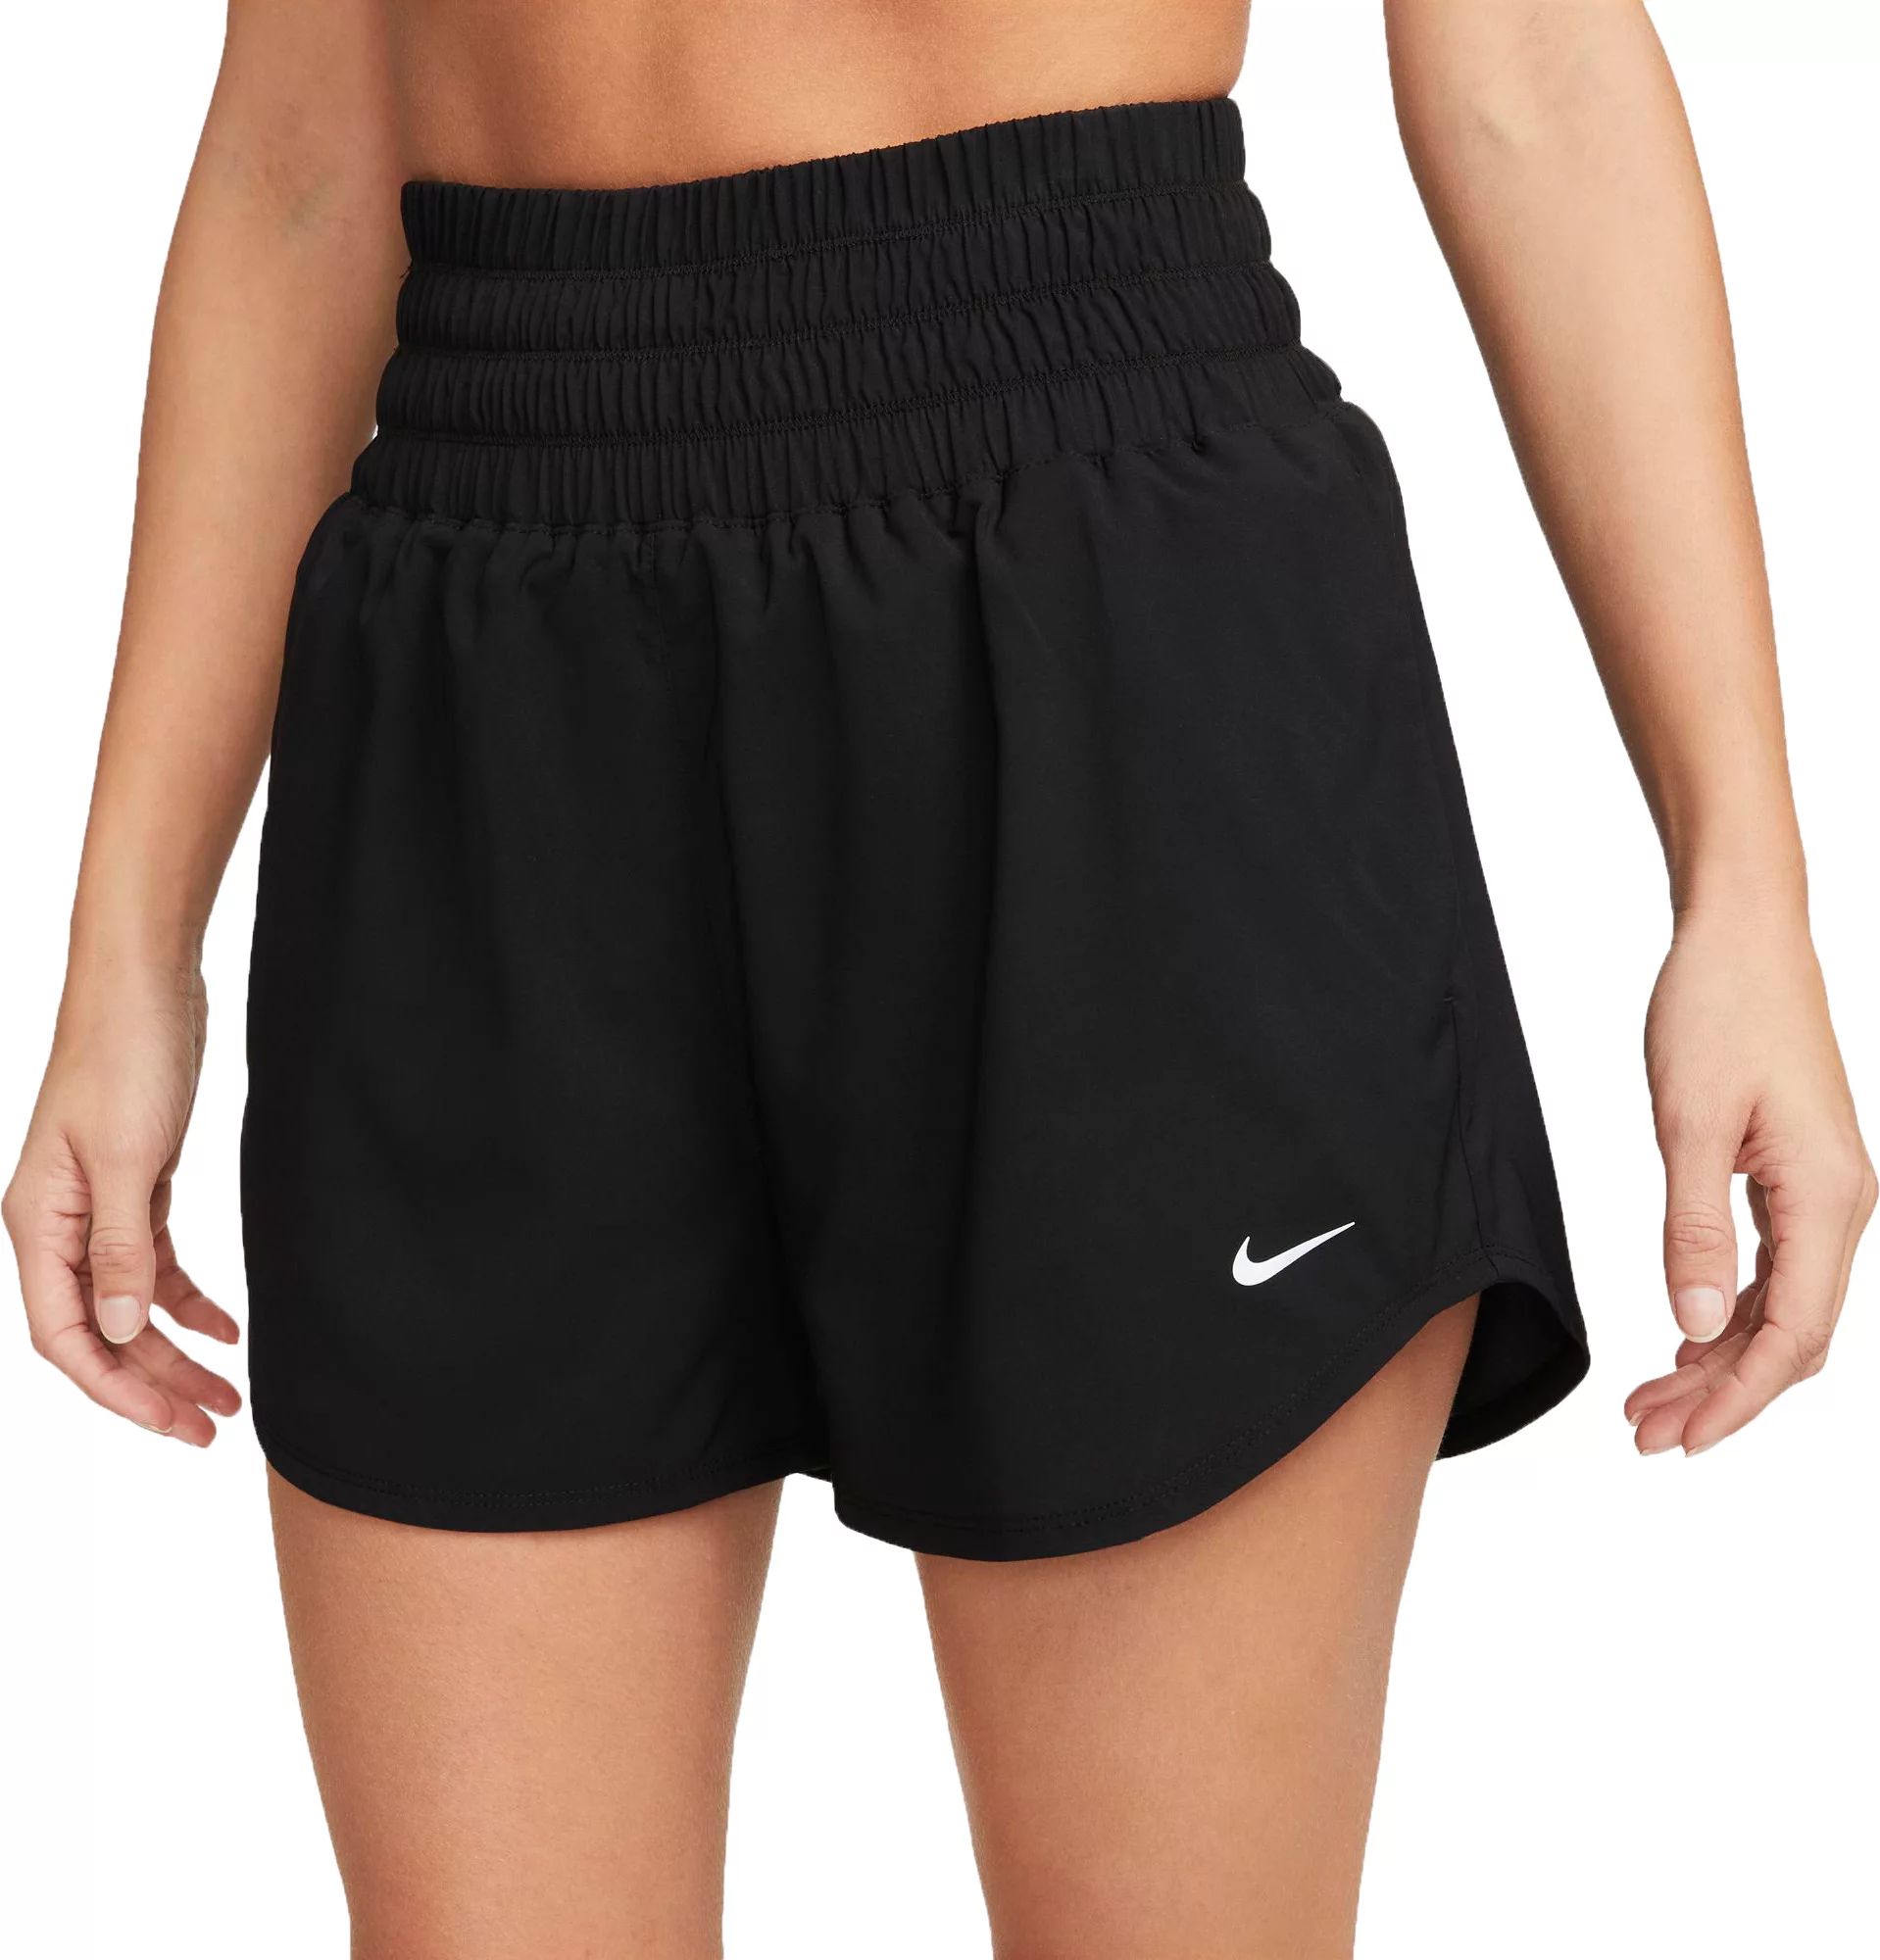 Nike One Ultra High Rise Shorts, Women's, Medium, Black - Mother's Day Gifts | Dick's Sporting Goods